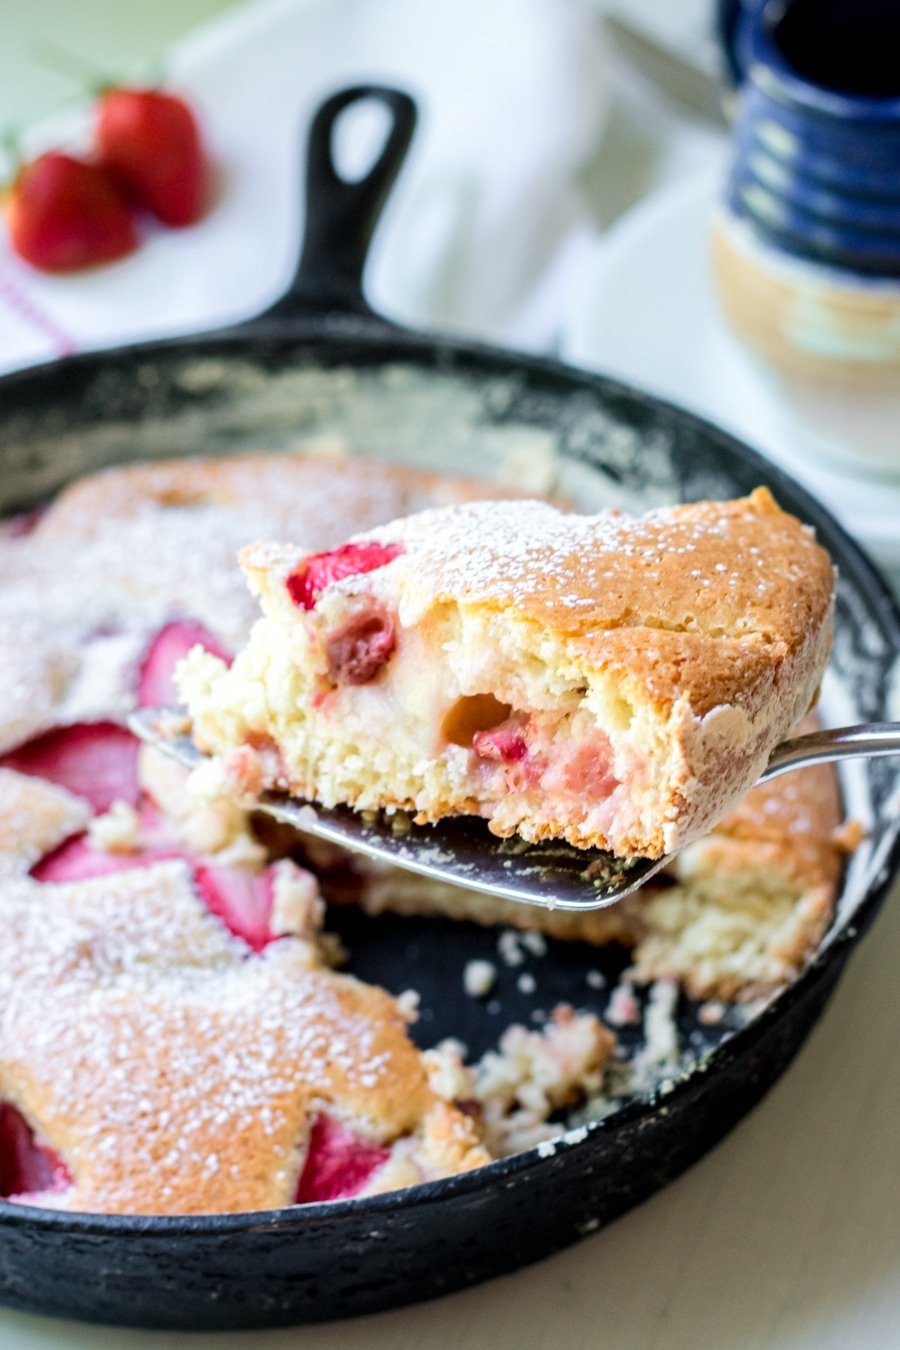 swlice of strawberry cake on pie server with full cake in a cast iron pan in the background